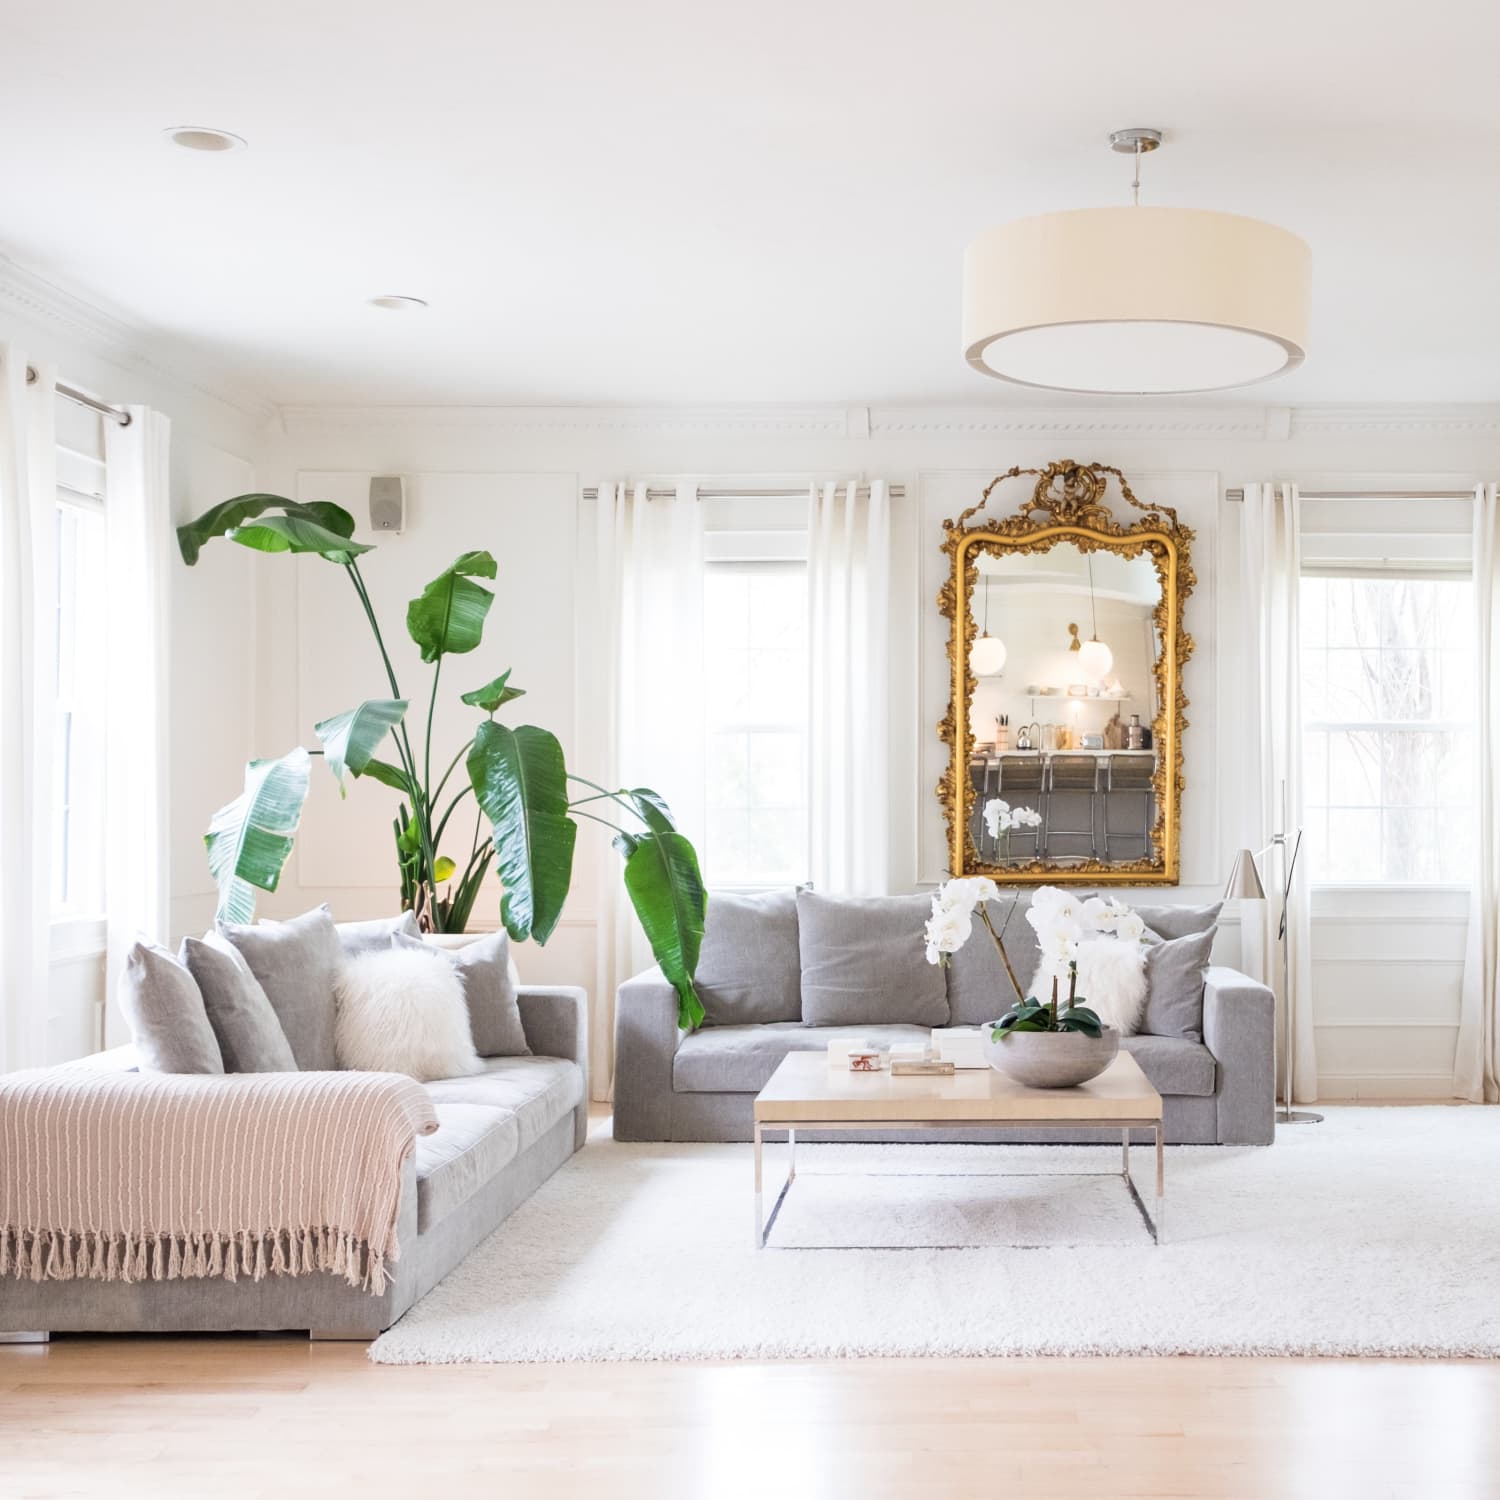 The 11 Best White Paint Colors for a Neutral Space